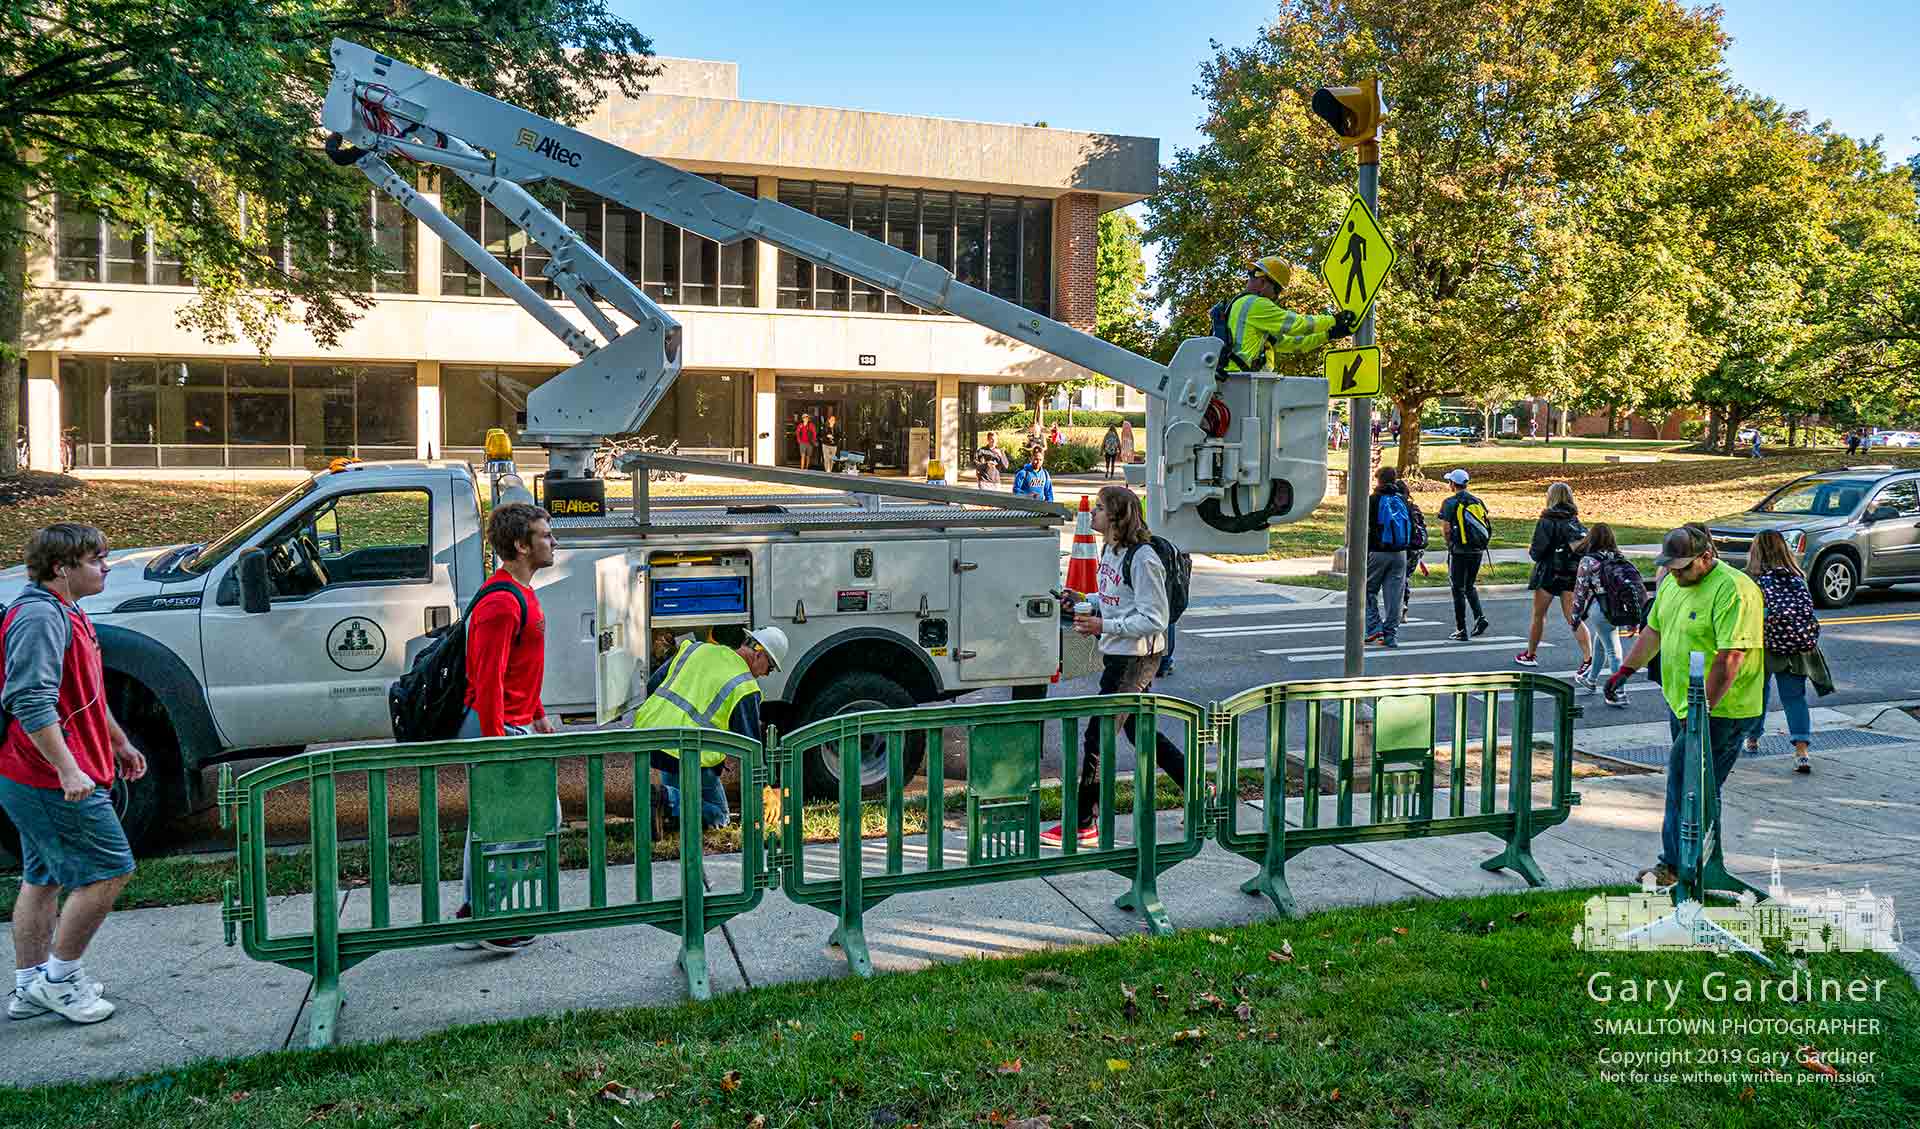 Otterbein students navigate their way past Westerville city workers placing barriers on the sidewalk and new flashing lights at the crosswalk on West Main Street as part of the preparations for the Democratic candidate's debate. My Final Photo for Oct. 10, 2019.